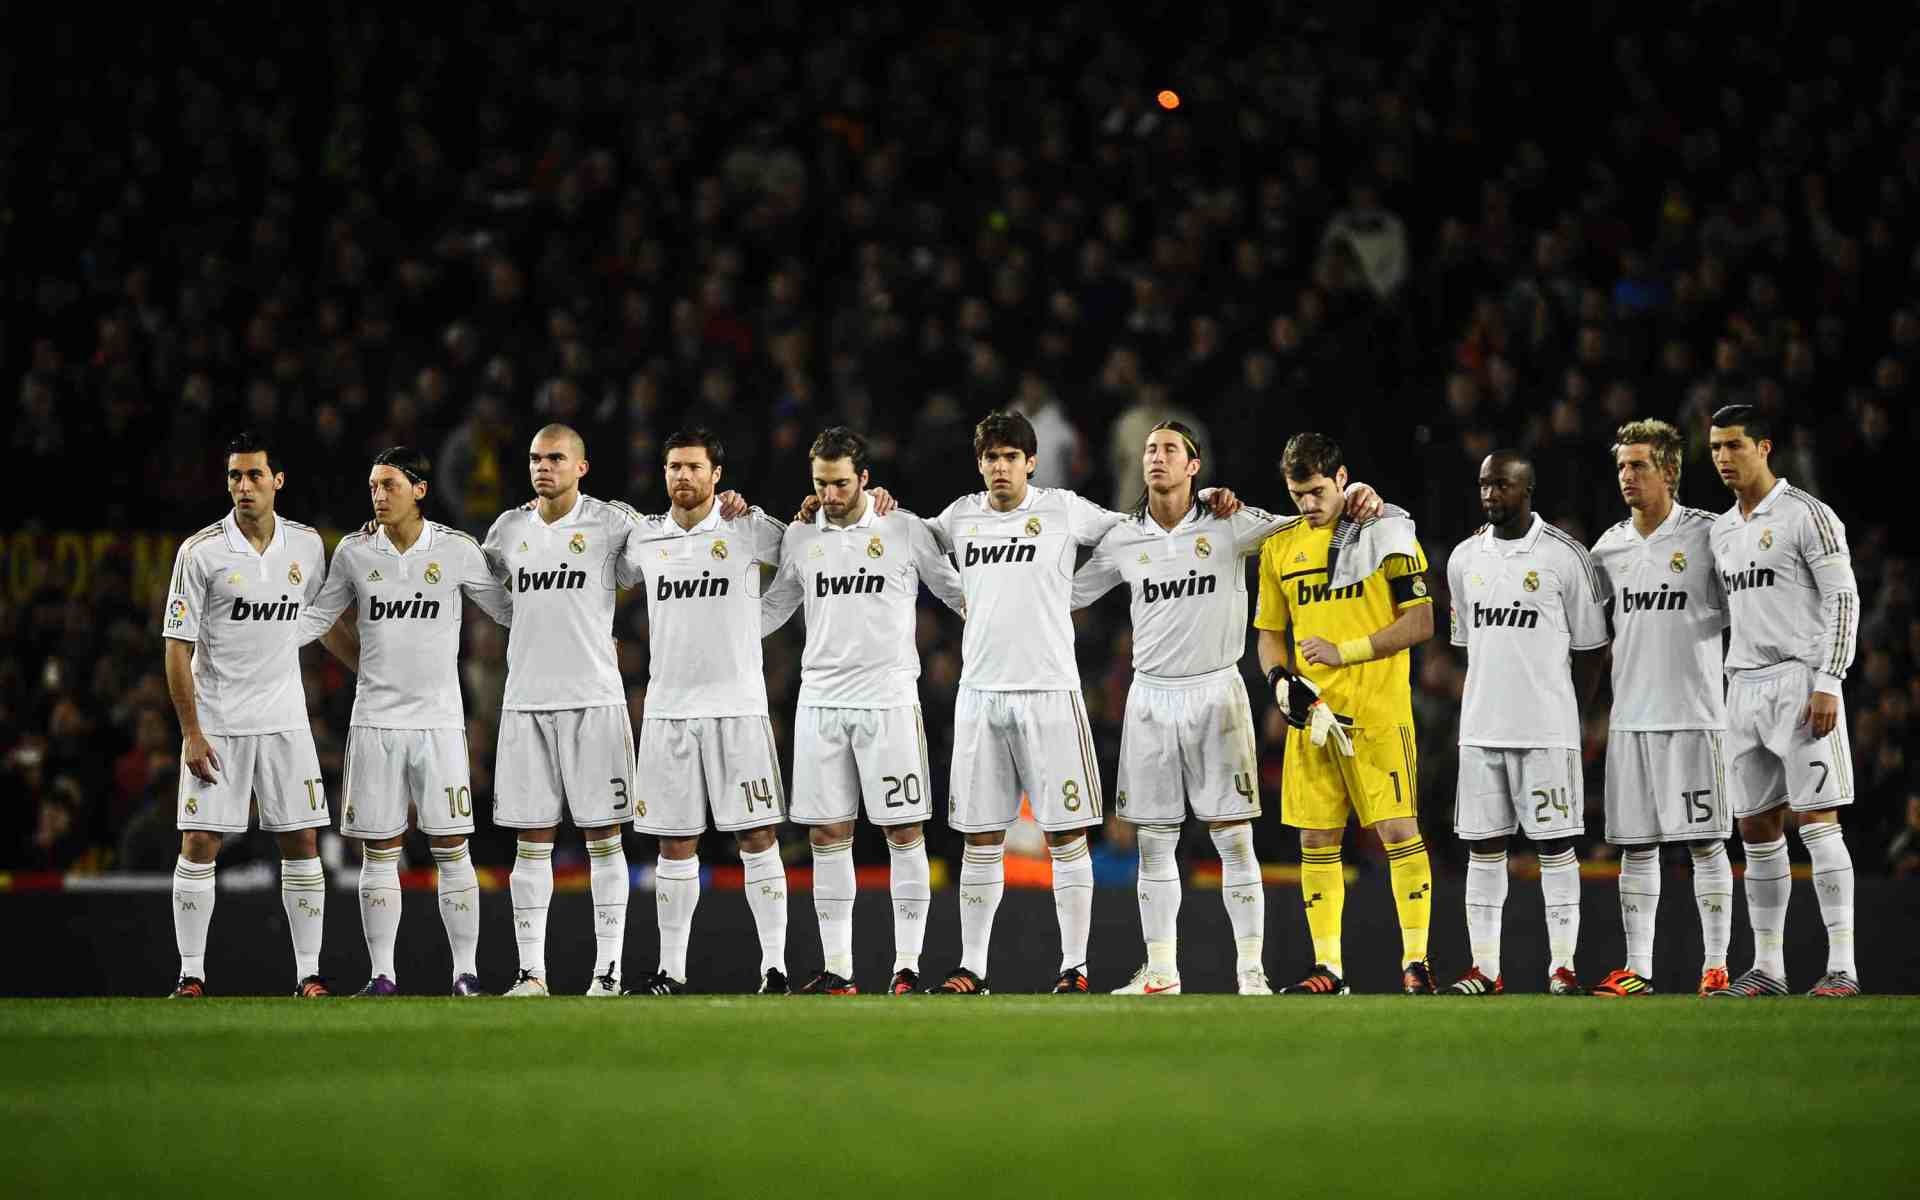 1920x1200 Search Results for “real madrid team hd wallpapers – Adorable Wallpapers